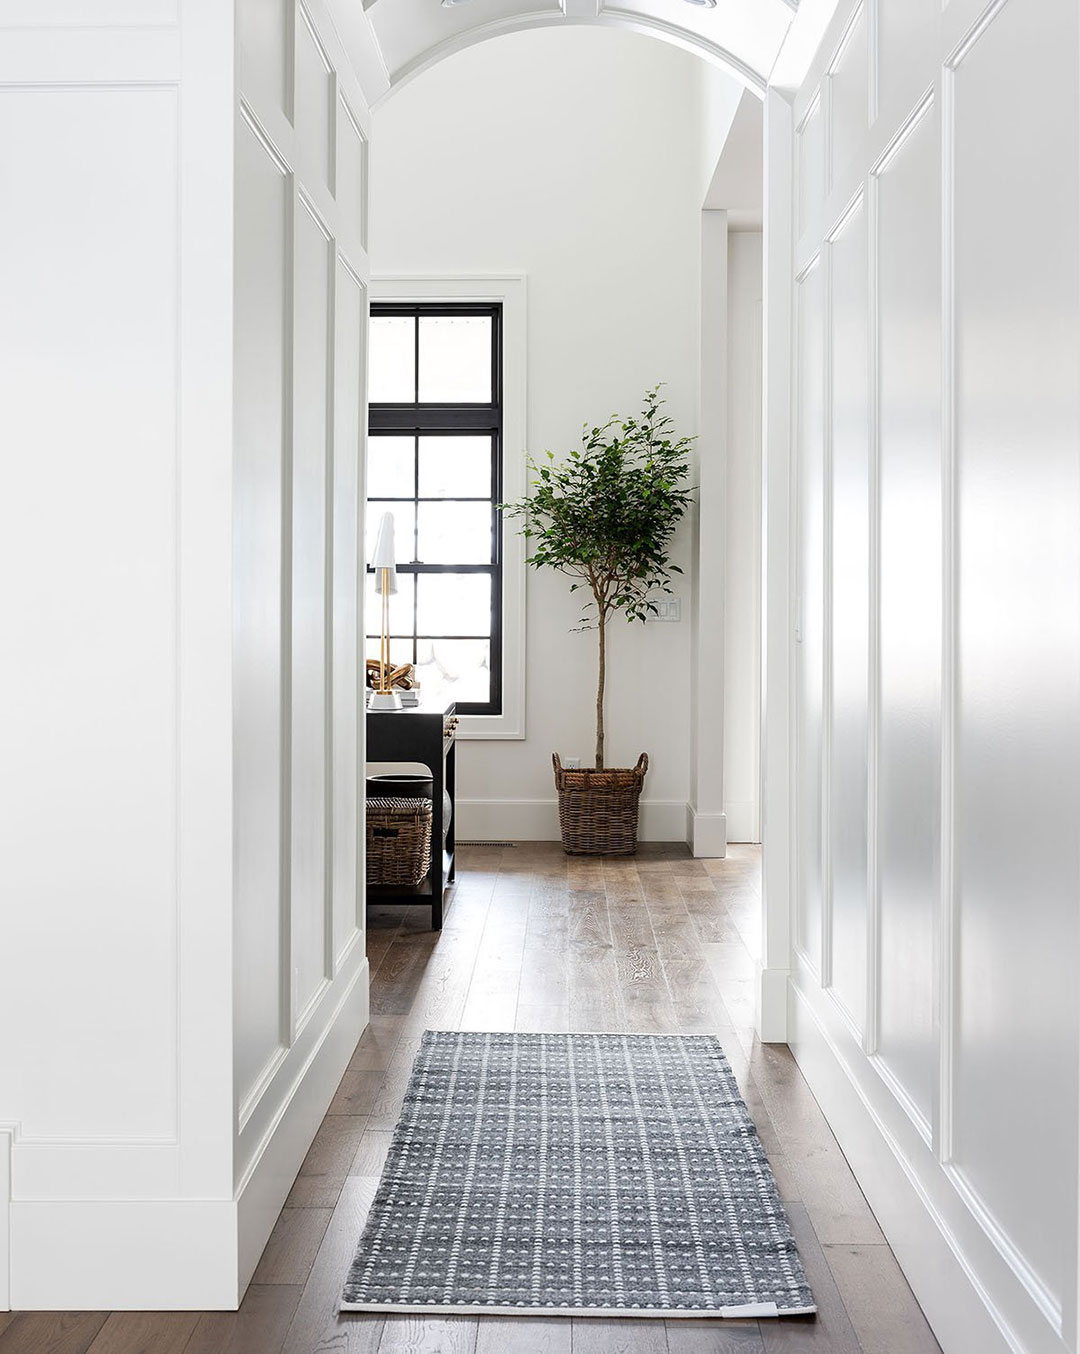 Example of an outdoor / indoor rug that is in a hallway.Mcgee and Co